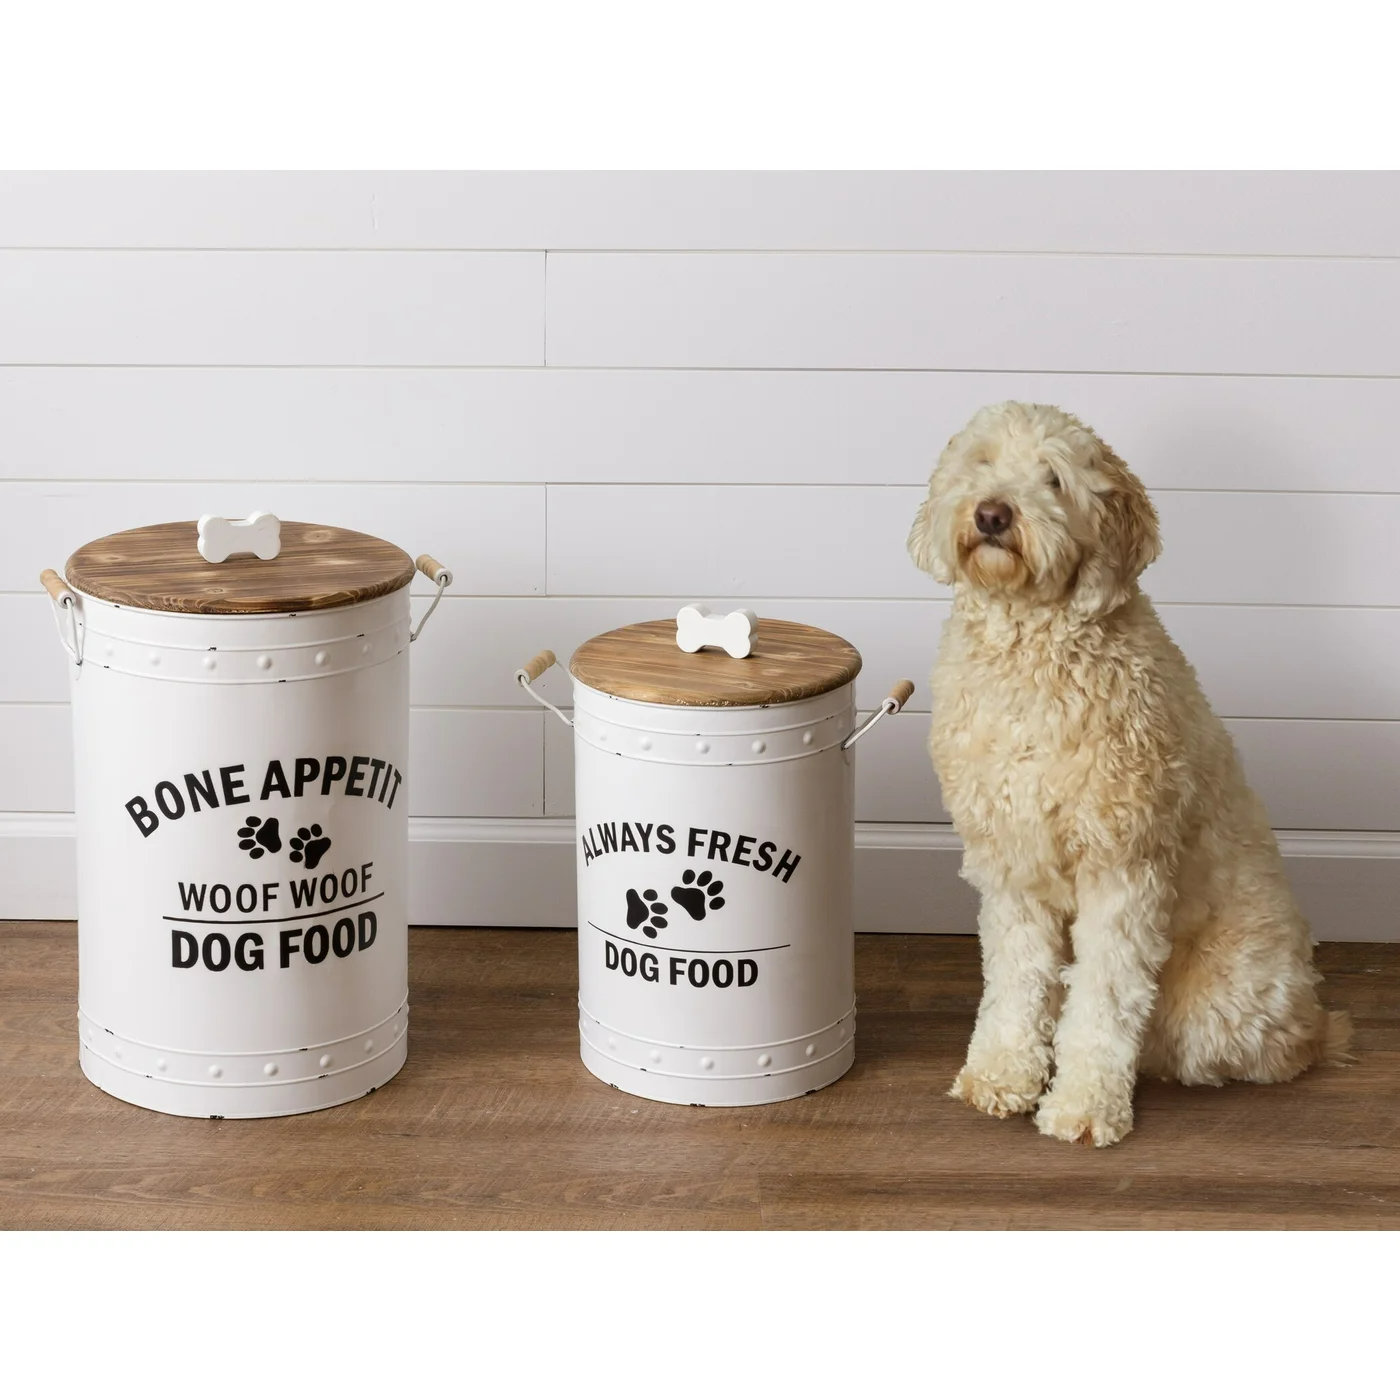 Set of 2 Bone Appetit Dog Food Storage Containers